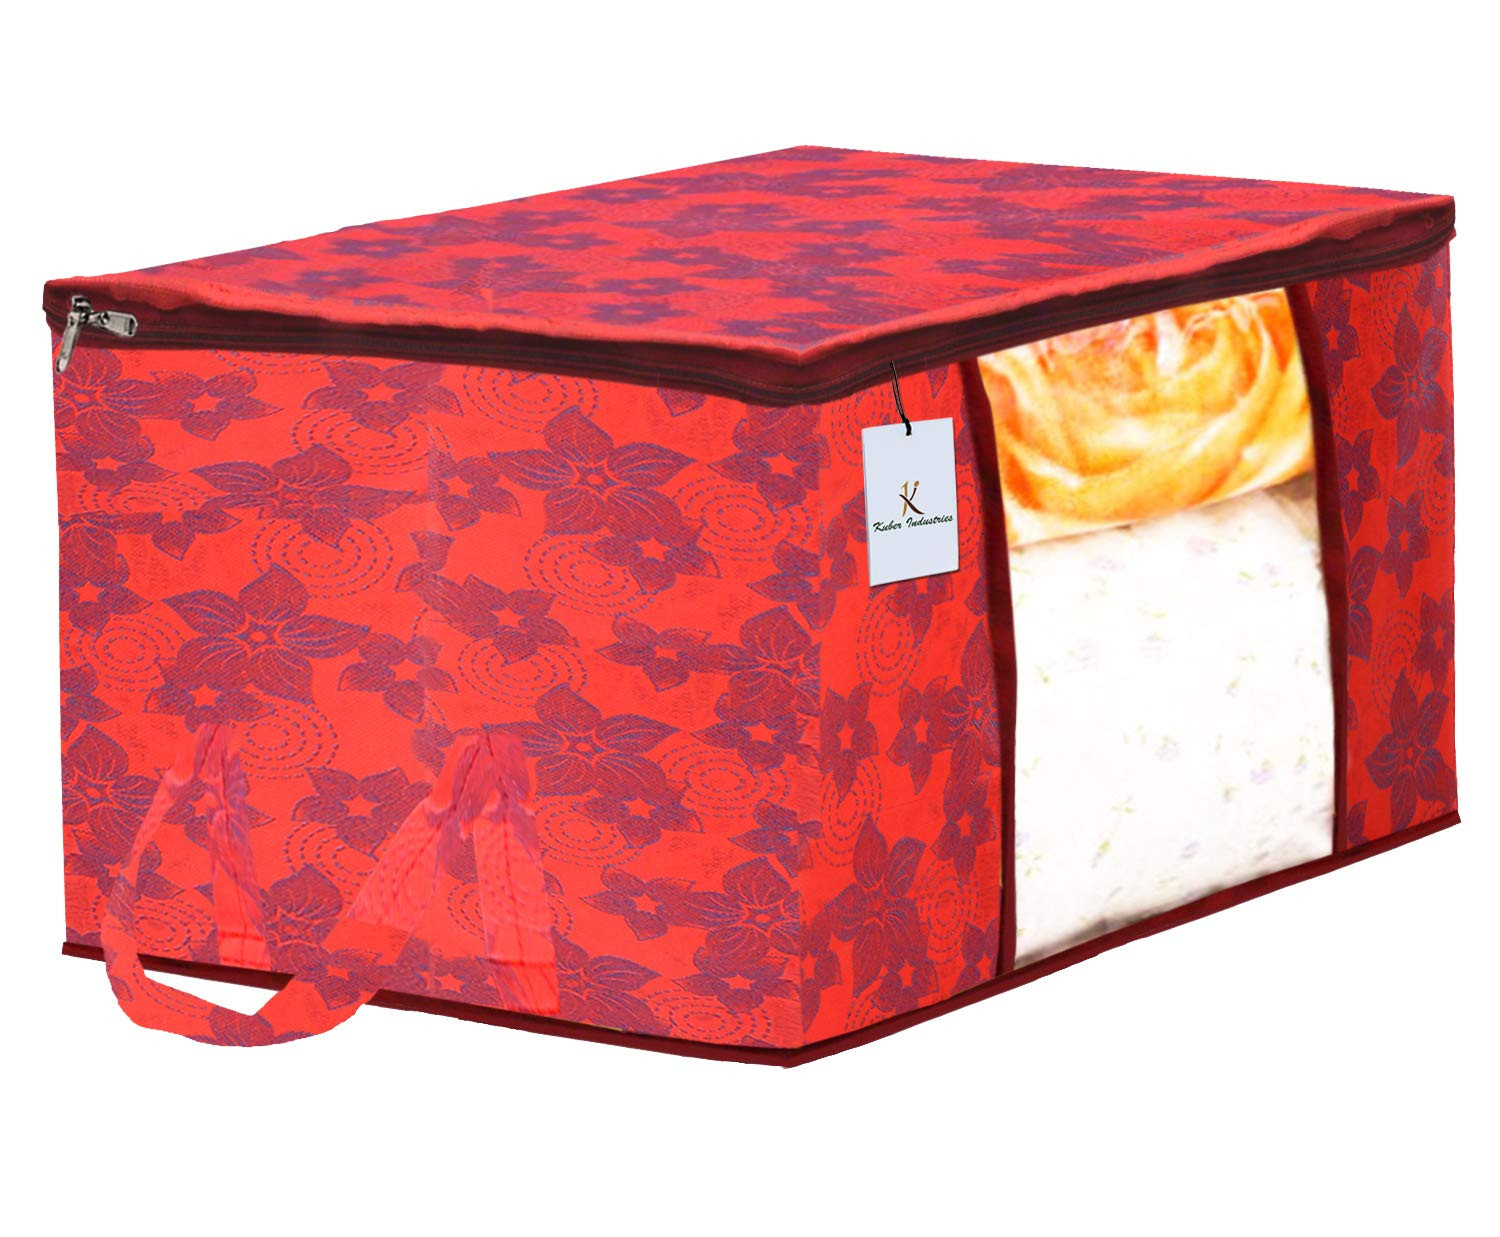 Kuber Industries Metalic Printed Non Woven Saree Cover And Underbed Storage Bag, Storage Organiser, Blanket Cover, Ivory Red & Red  -CTKTC42373